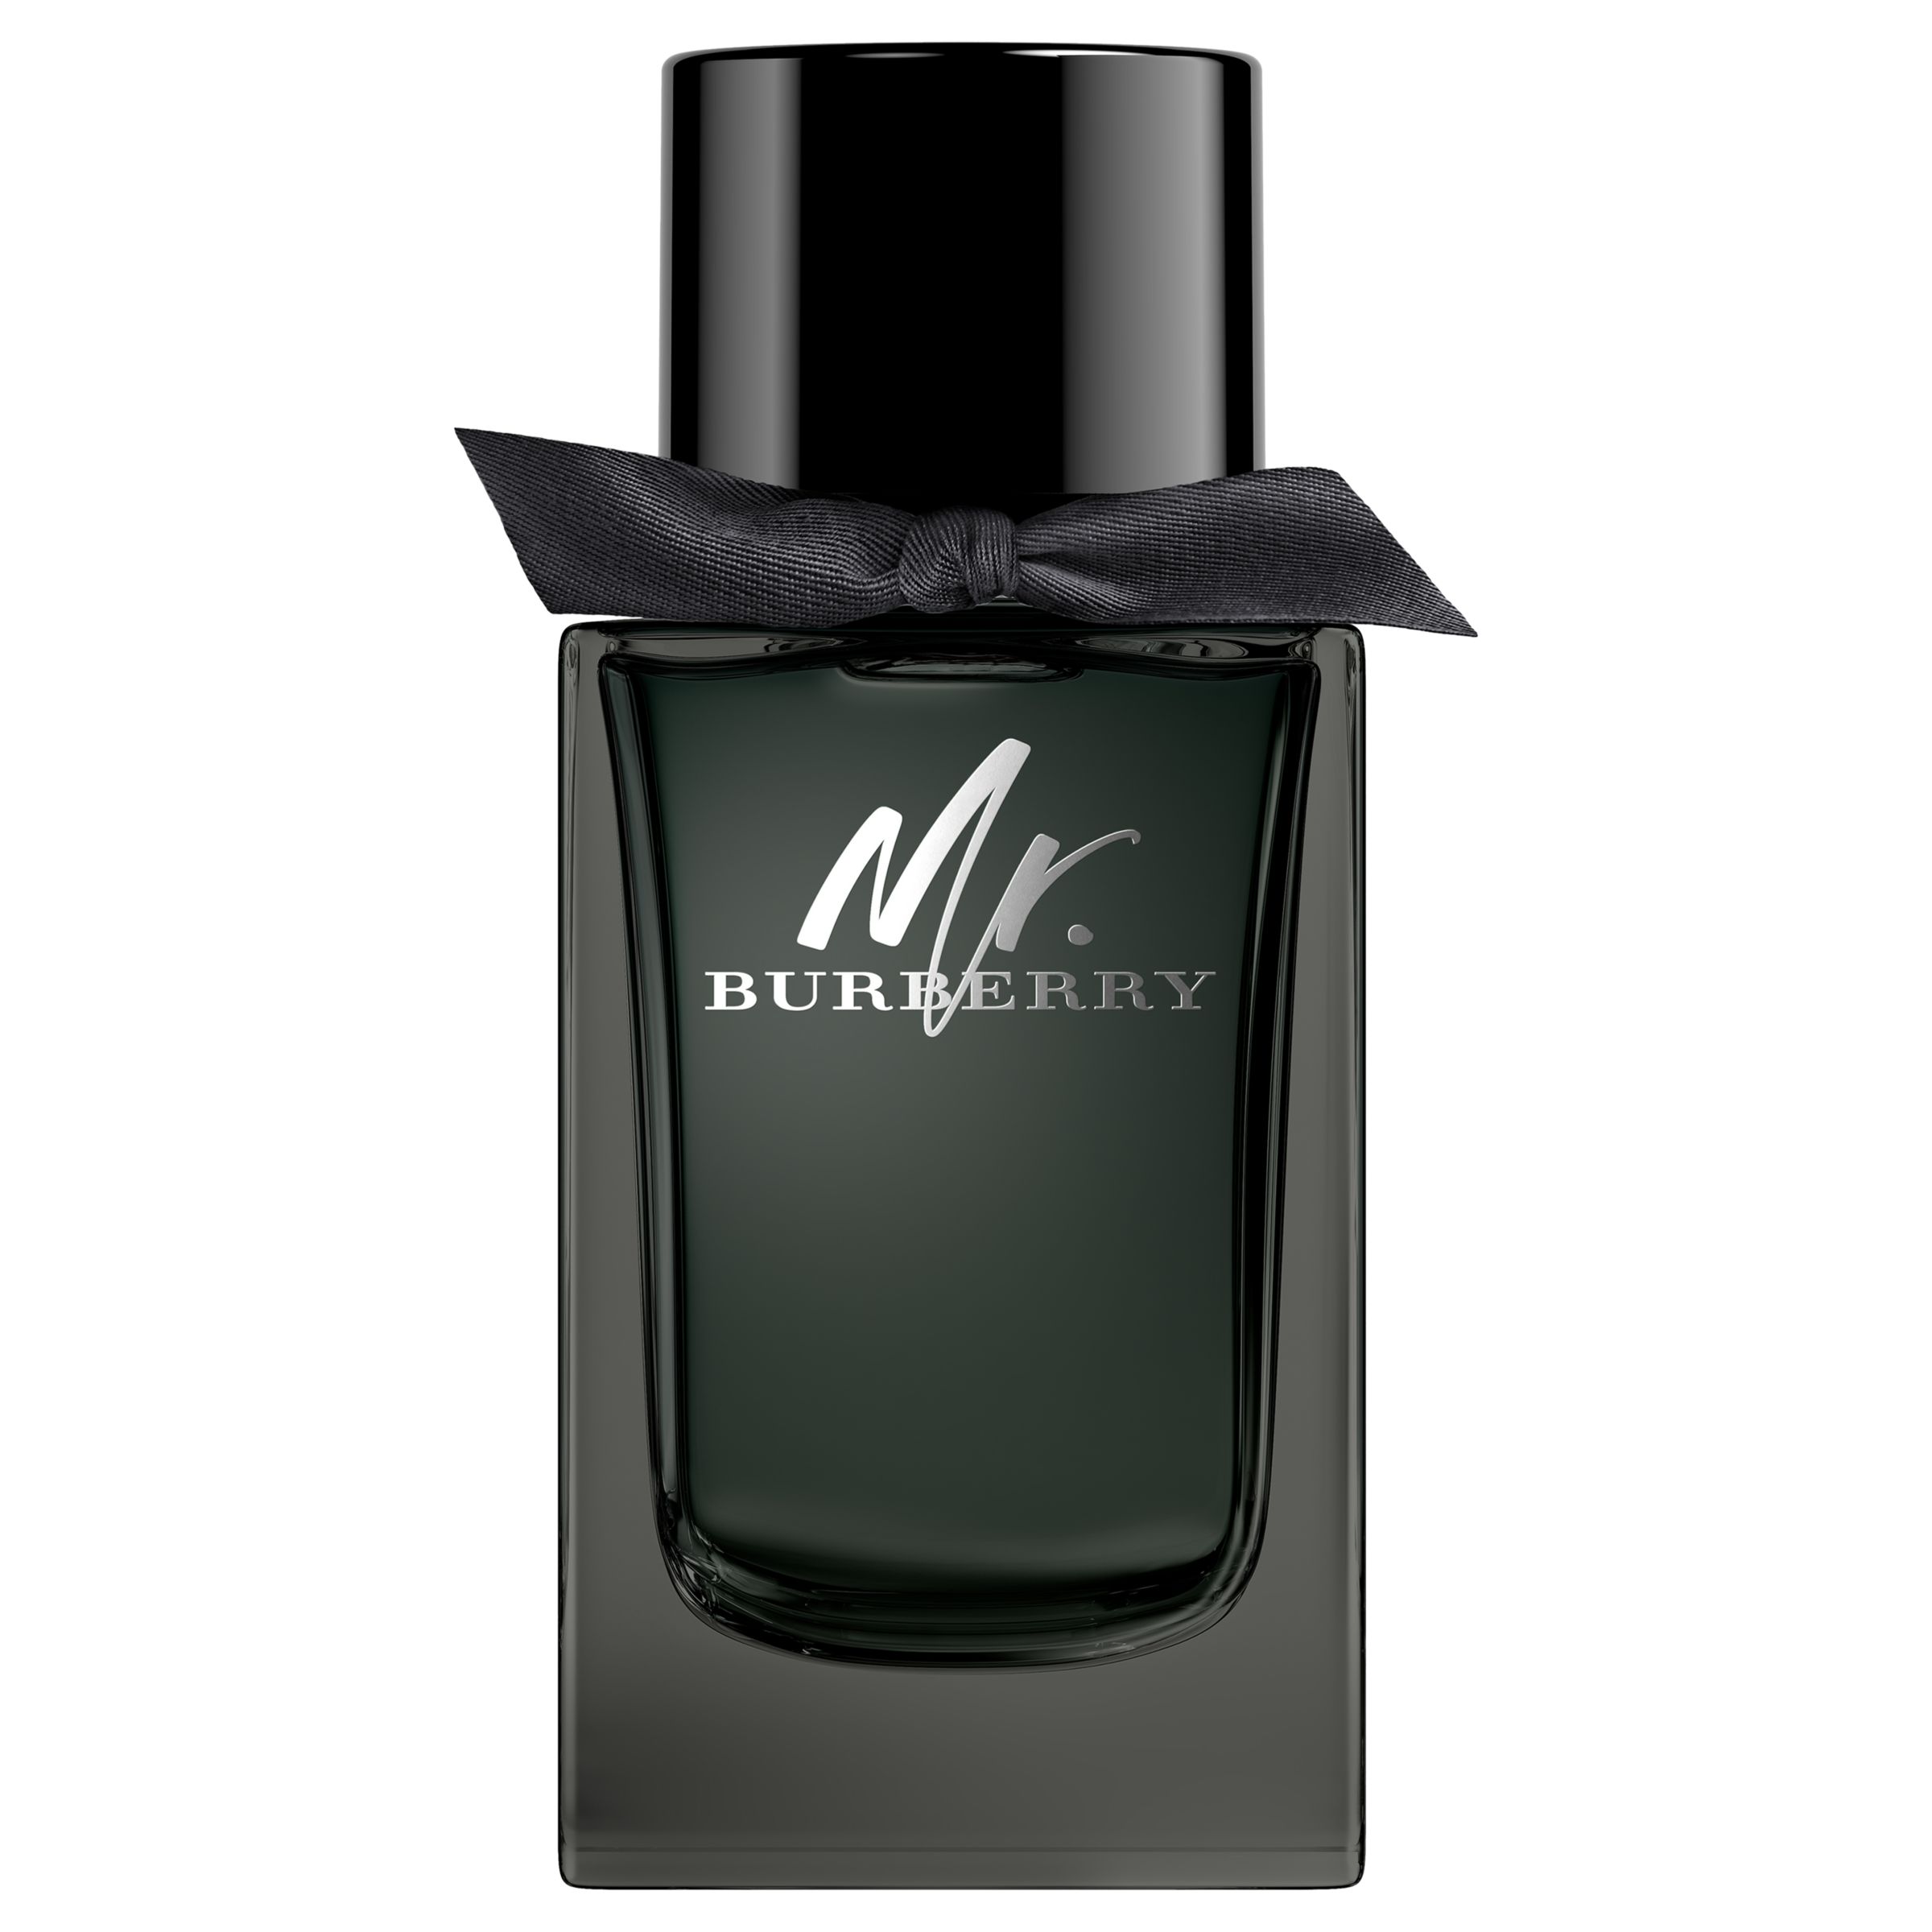 mr burberry aftershave